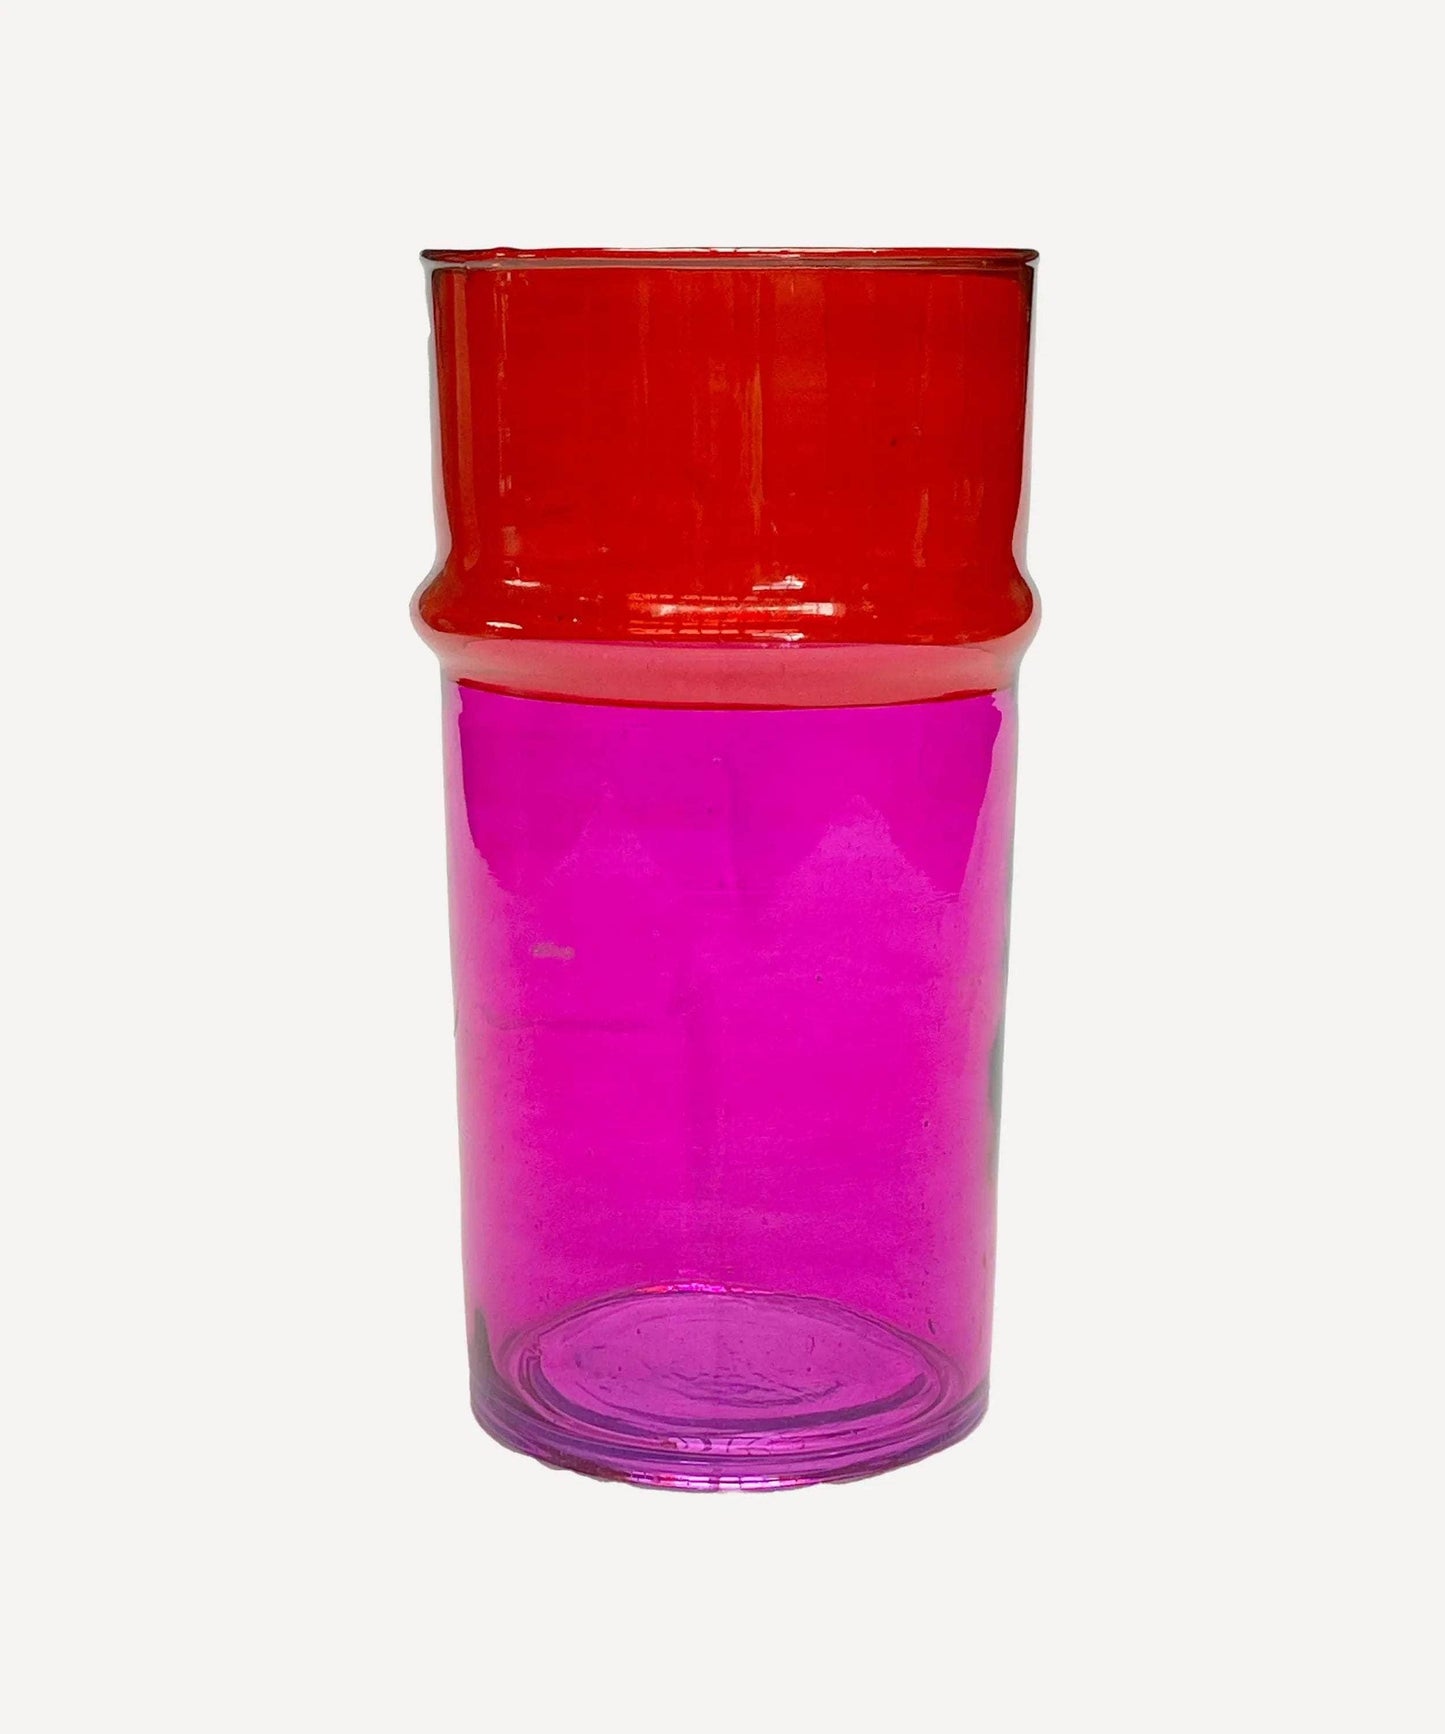 Load image into Gallery viewer, Beldi Large Vase, Pink and Red
